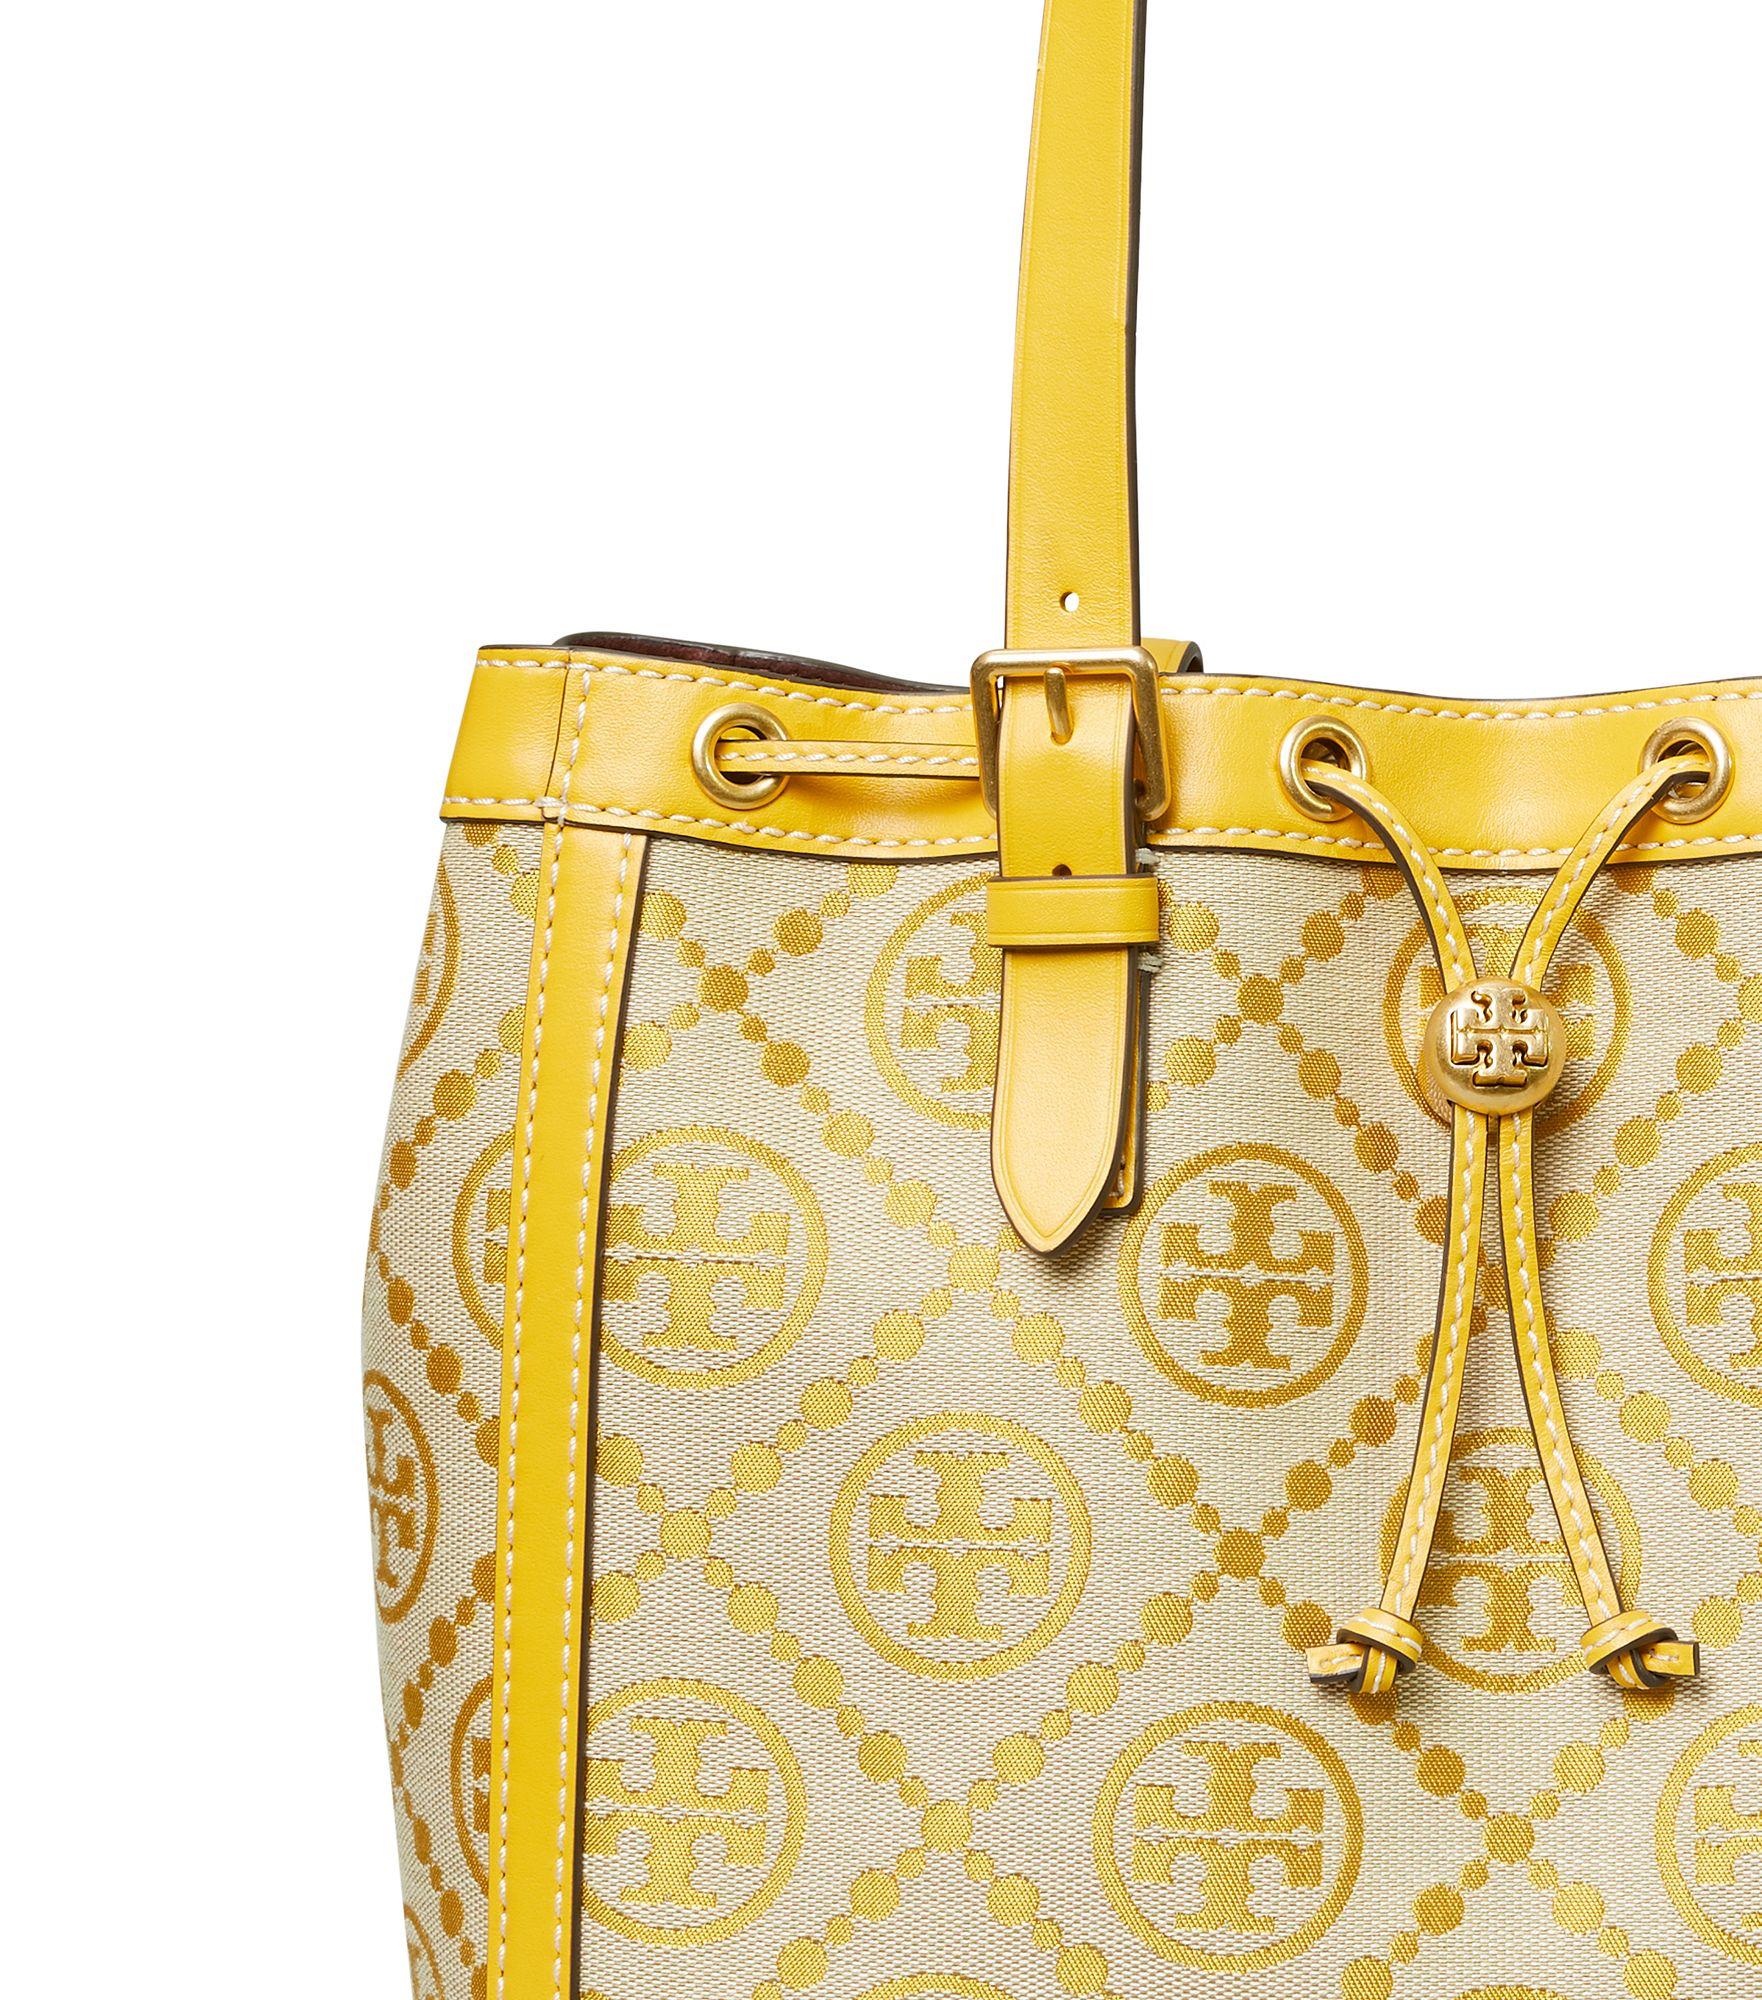 Tory Burch Leather T Monogram Jacquard Small Tote Bag in Yellow - Lyst